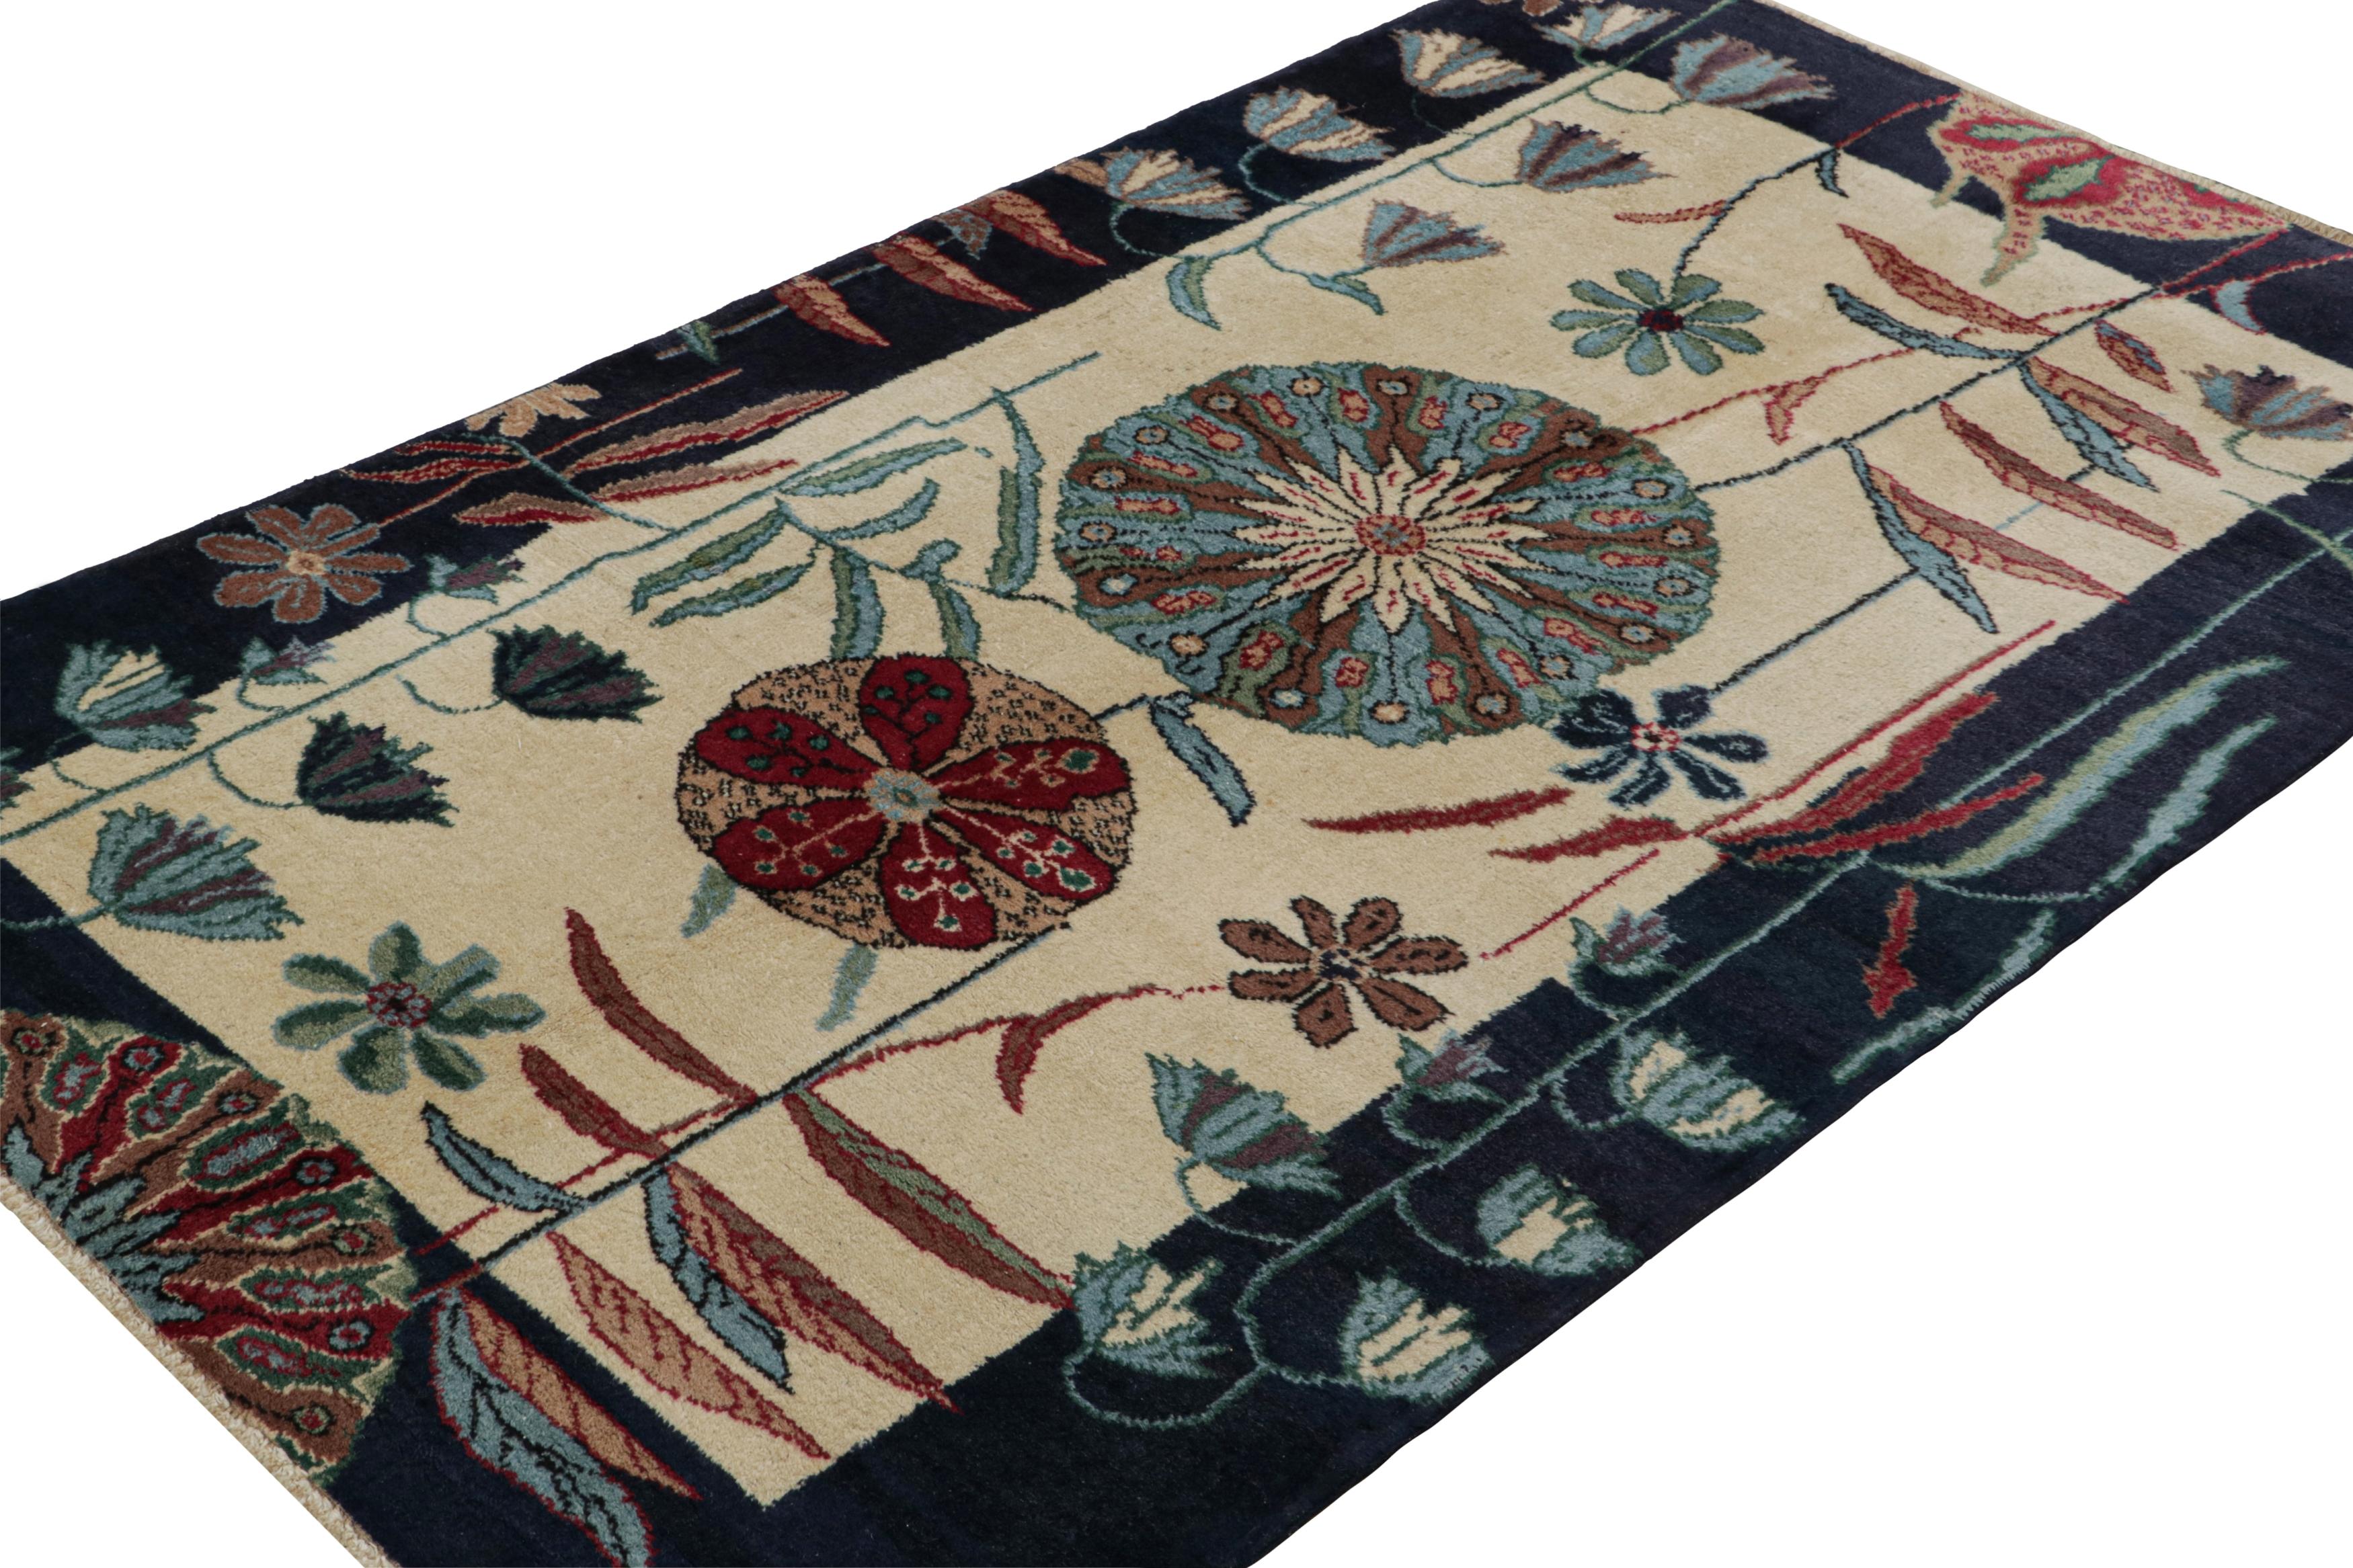 Hand-knotted in wool, circa 1960 - 1970, this 4x7 vintage Müren Art Deco rug is an exciting new addition to Rug & Kilim Mid-century Pasha Collection. Its design, showcasing Chinese Art Deco sensibilities, is believed to be a rare work of mid-century